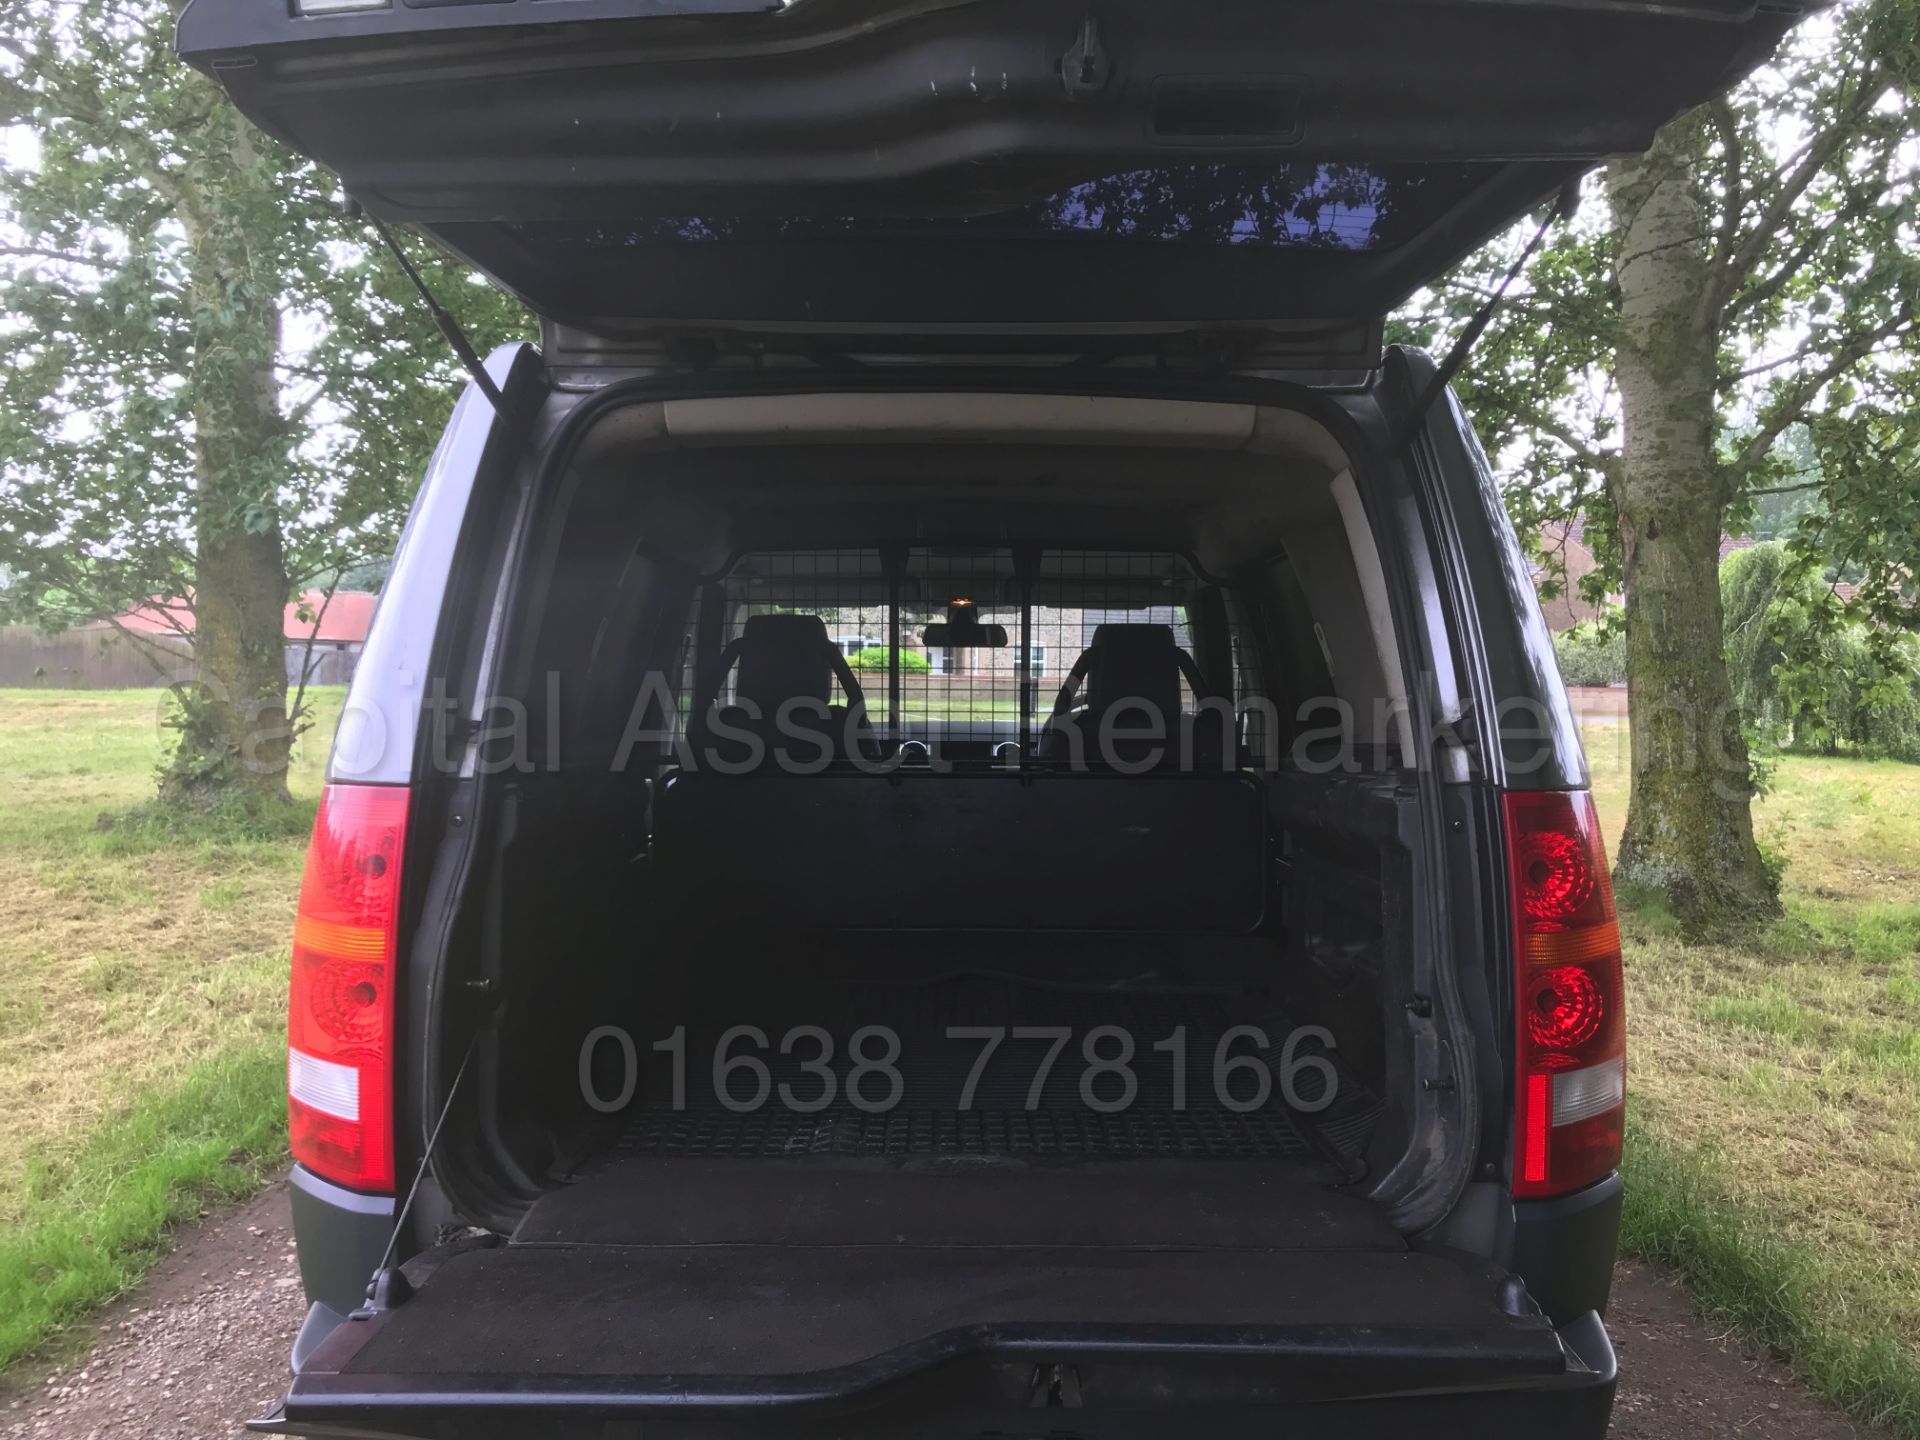 (On Sale) LAND ROVER DISCOVERY 3 'XS EDITION' **COMMERCIAL VAN**(2008 MODEL) 'TDV6-190 BHP' (NO VAT) - Image 22 of 38